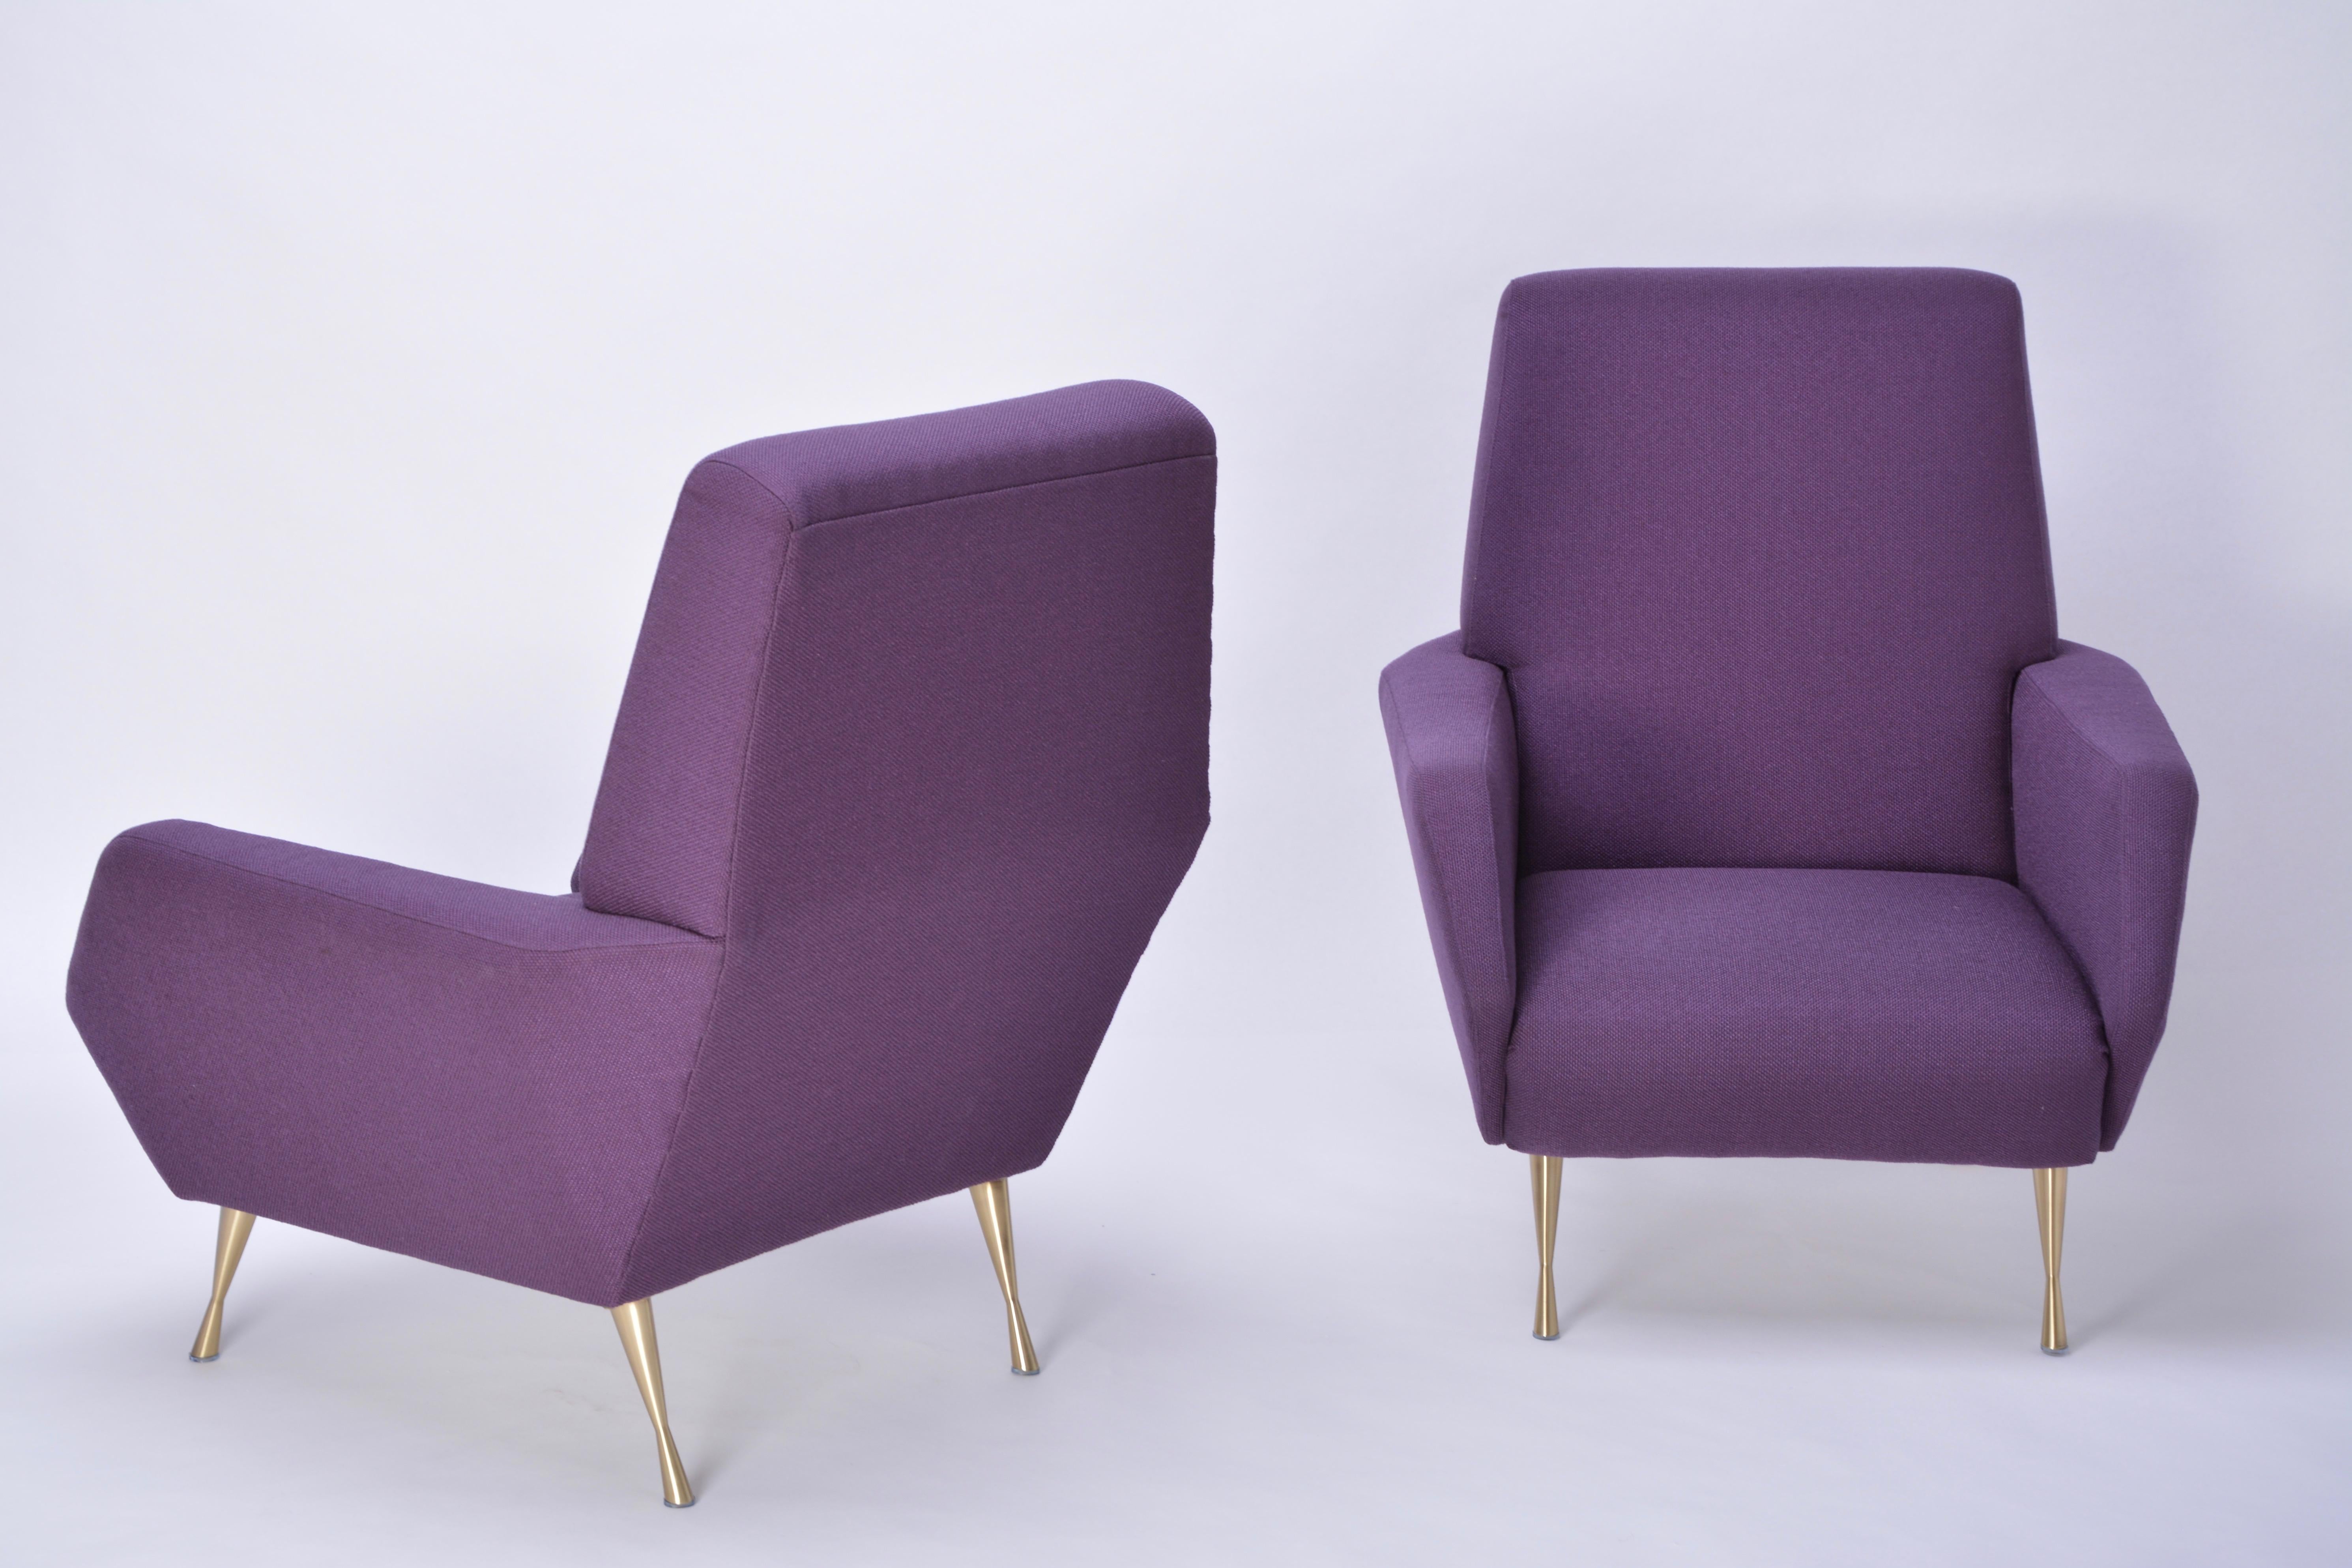 Pair of reupholstered Mid-Century Modern purple Italian lounge chairs

This pair of lounge chairs was produced in Italy in the 1950s. It has been completely reupholstered in purple fabric and has new brass feet.